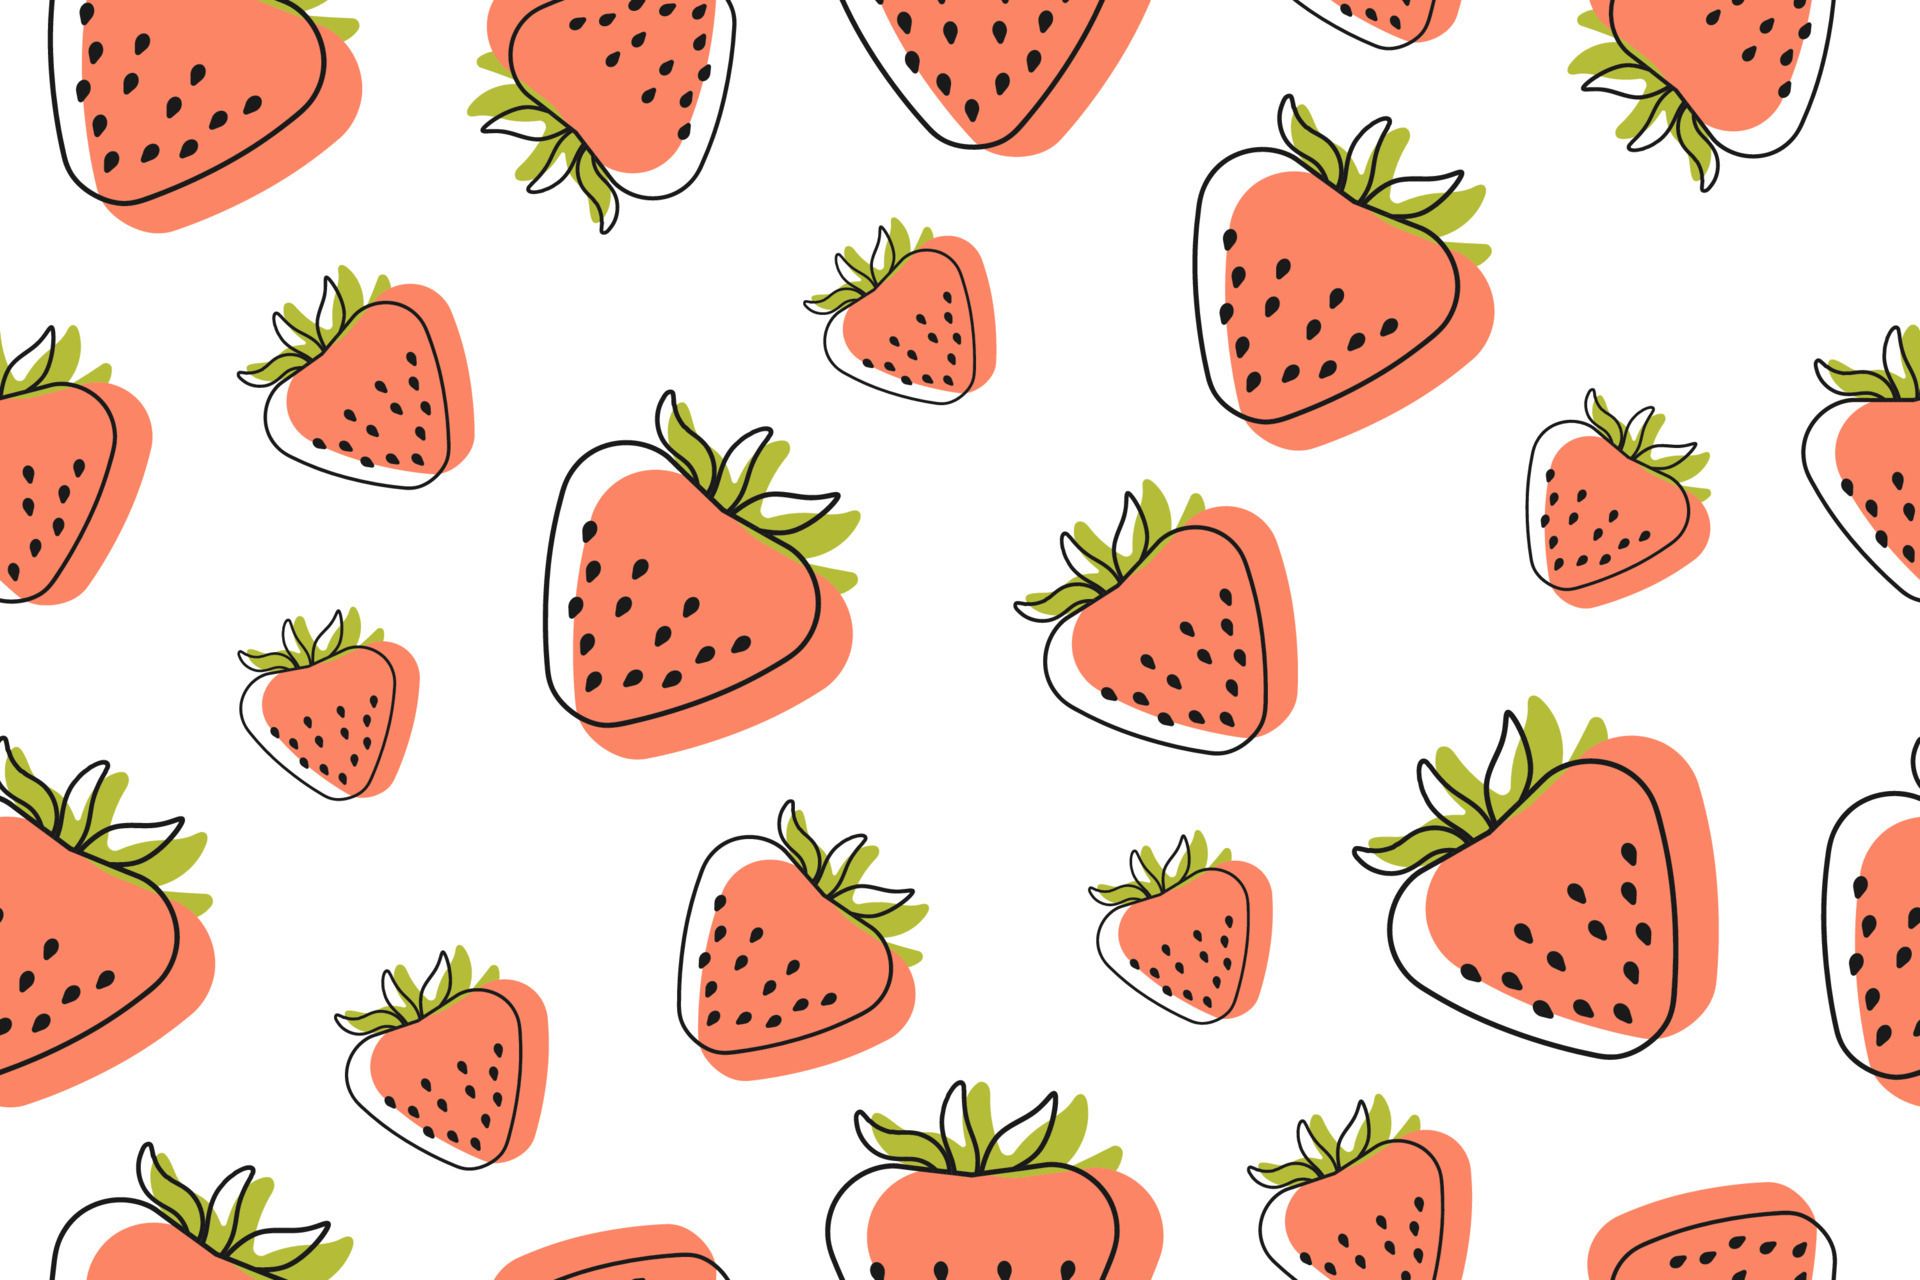 Strawberry Seamless Pattern. Hand drawn fresh Berries. Food Pattern for print, textile, fabric, wrapping paper, wallpaper, scrapbooking. Vector illustration, outline style